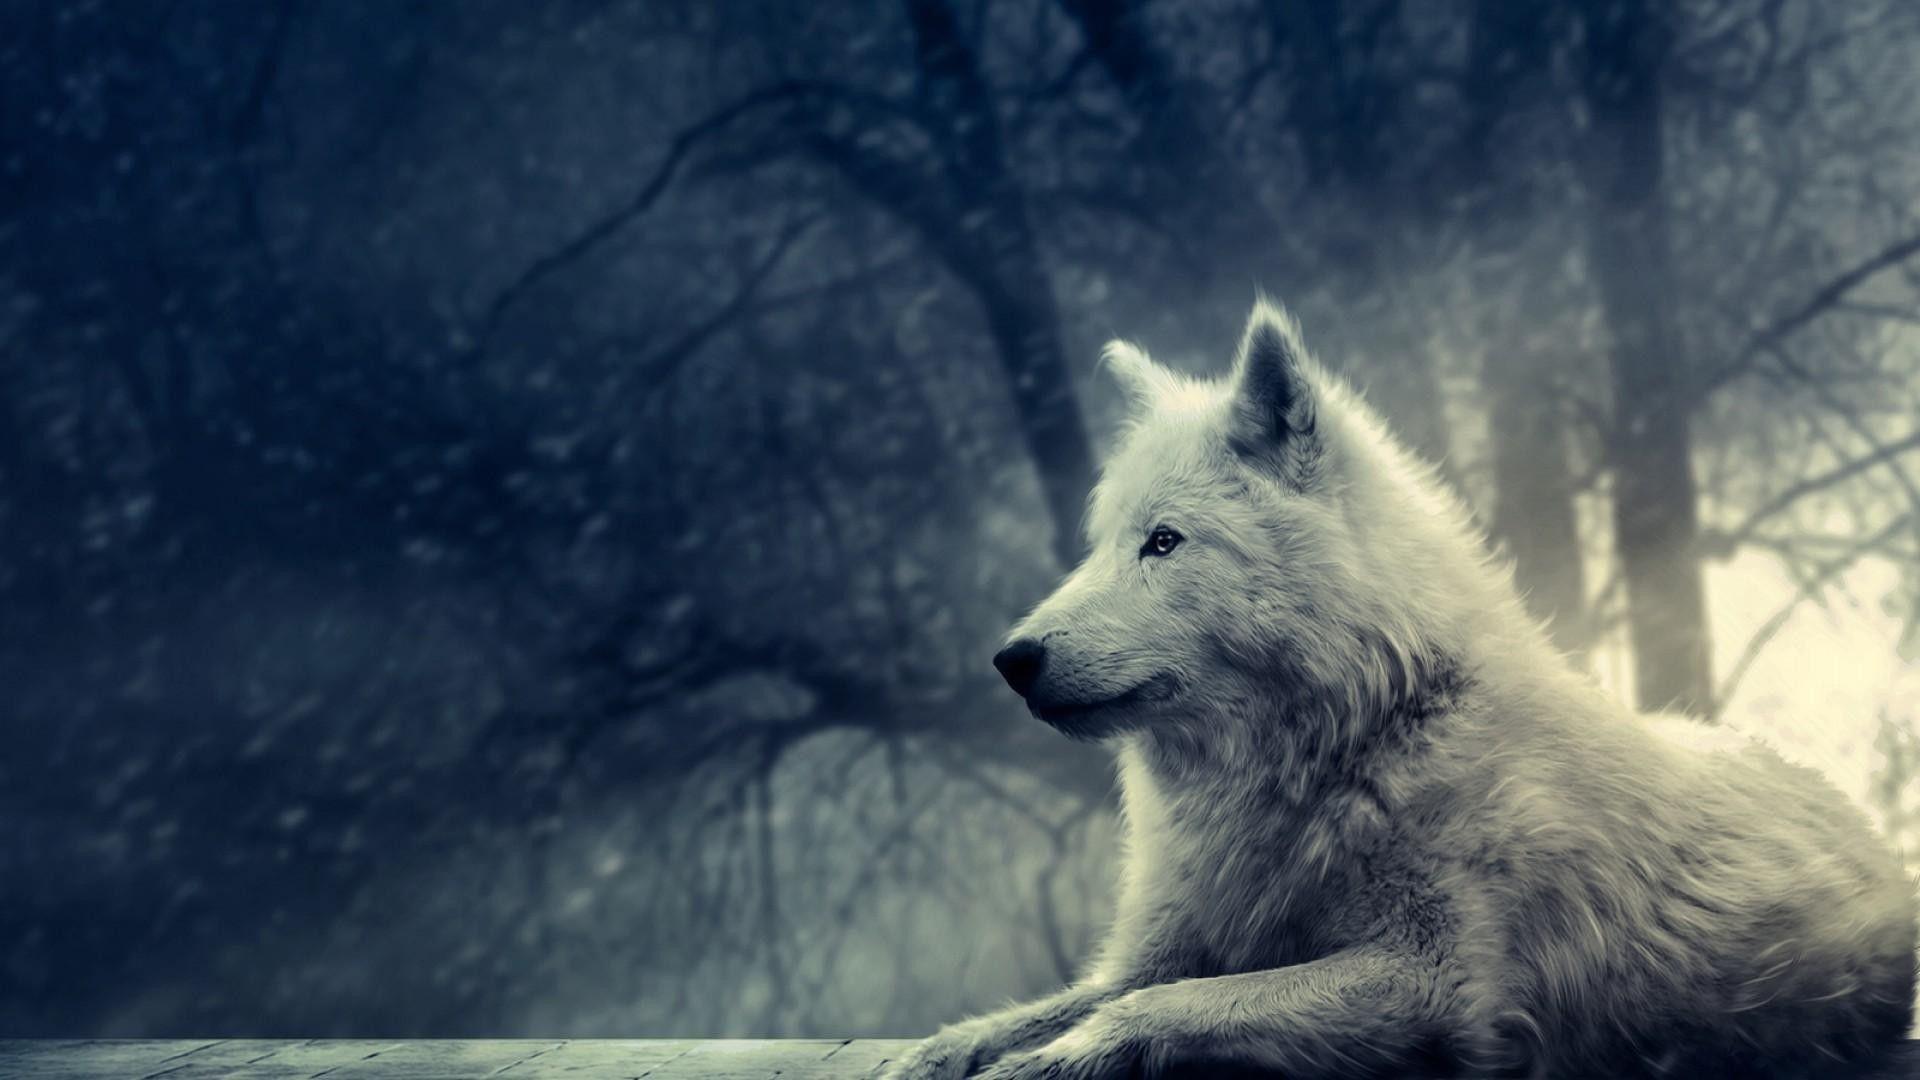 Wolf wallpaper HDDownload free amazing full HD background